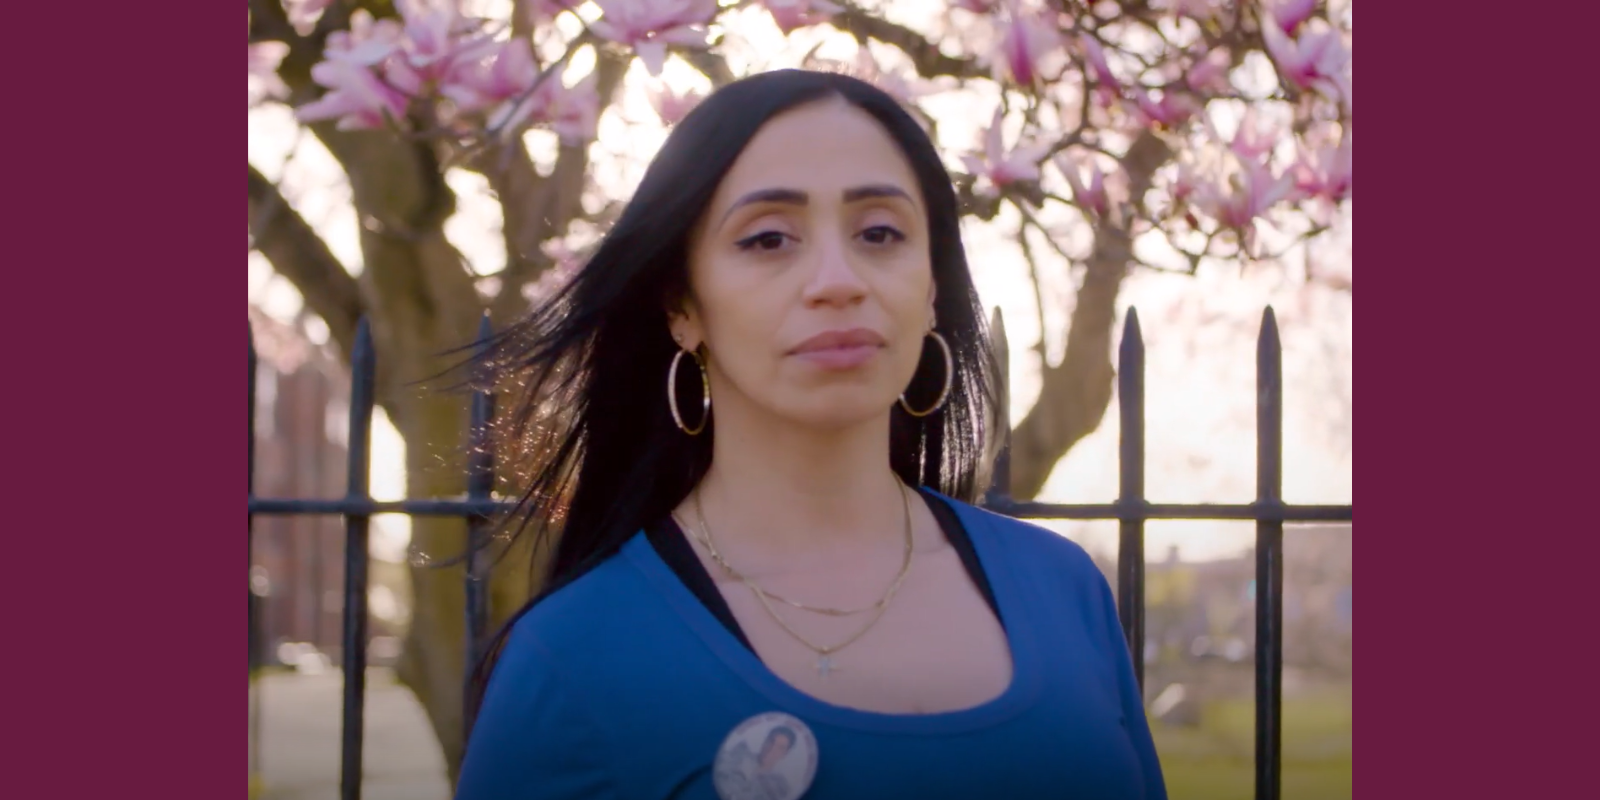 Natasha Tosado, a woman with long brown hair, faces the camera. She looks powerful and serious, and she is wearing a blue shirt and a pin with a photo of her son, Jayson, on it. Behind her is a fence and a blooming magnolia tree. 